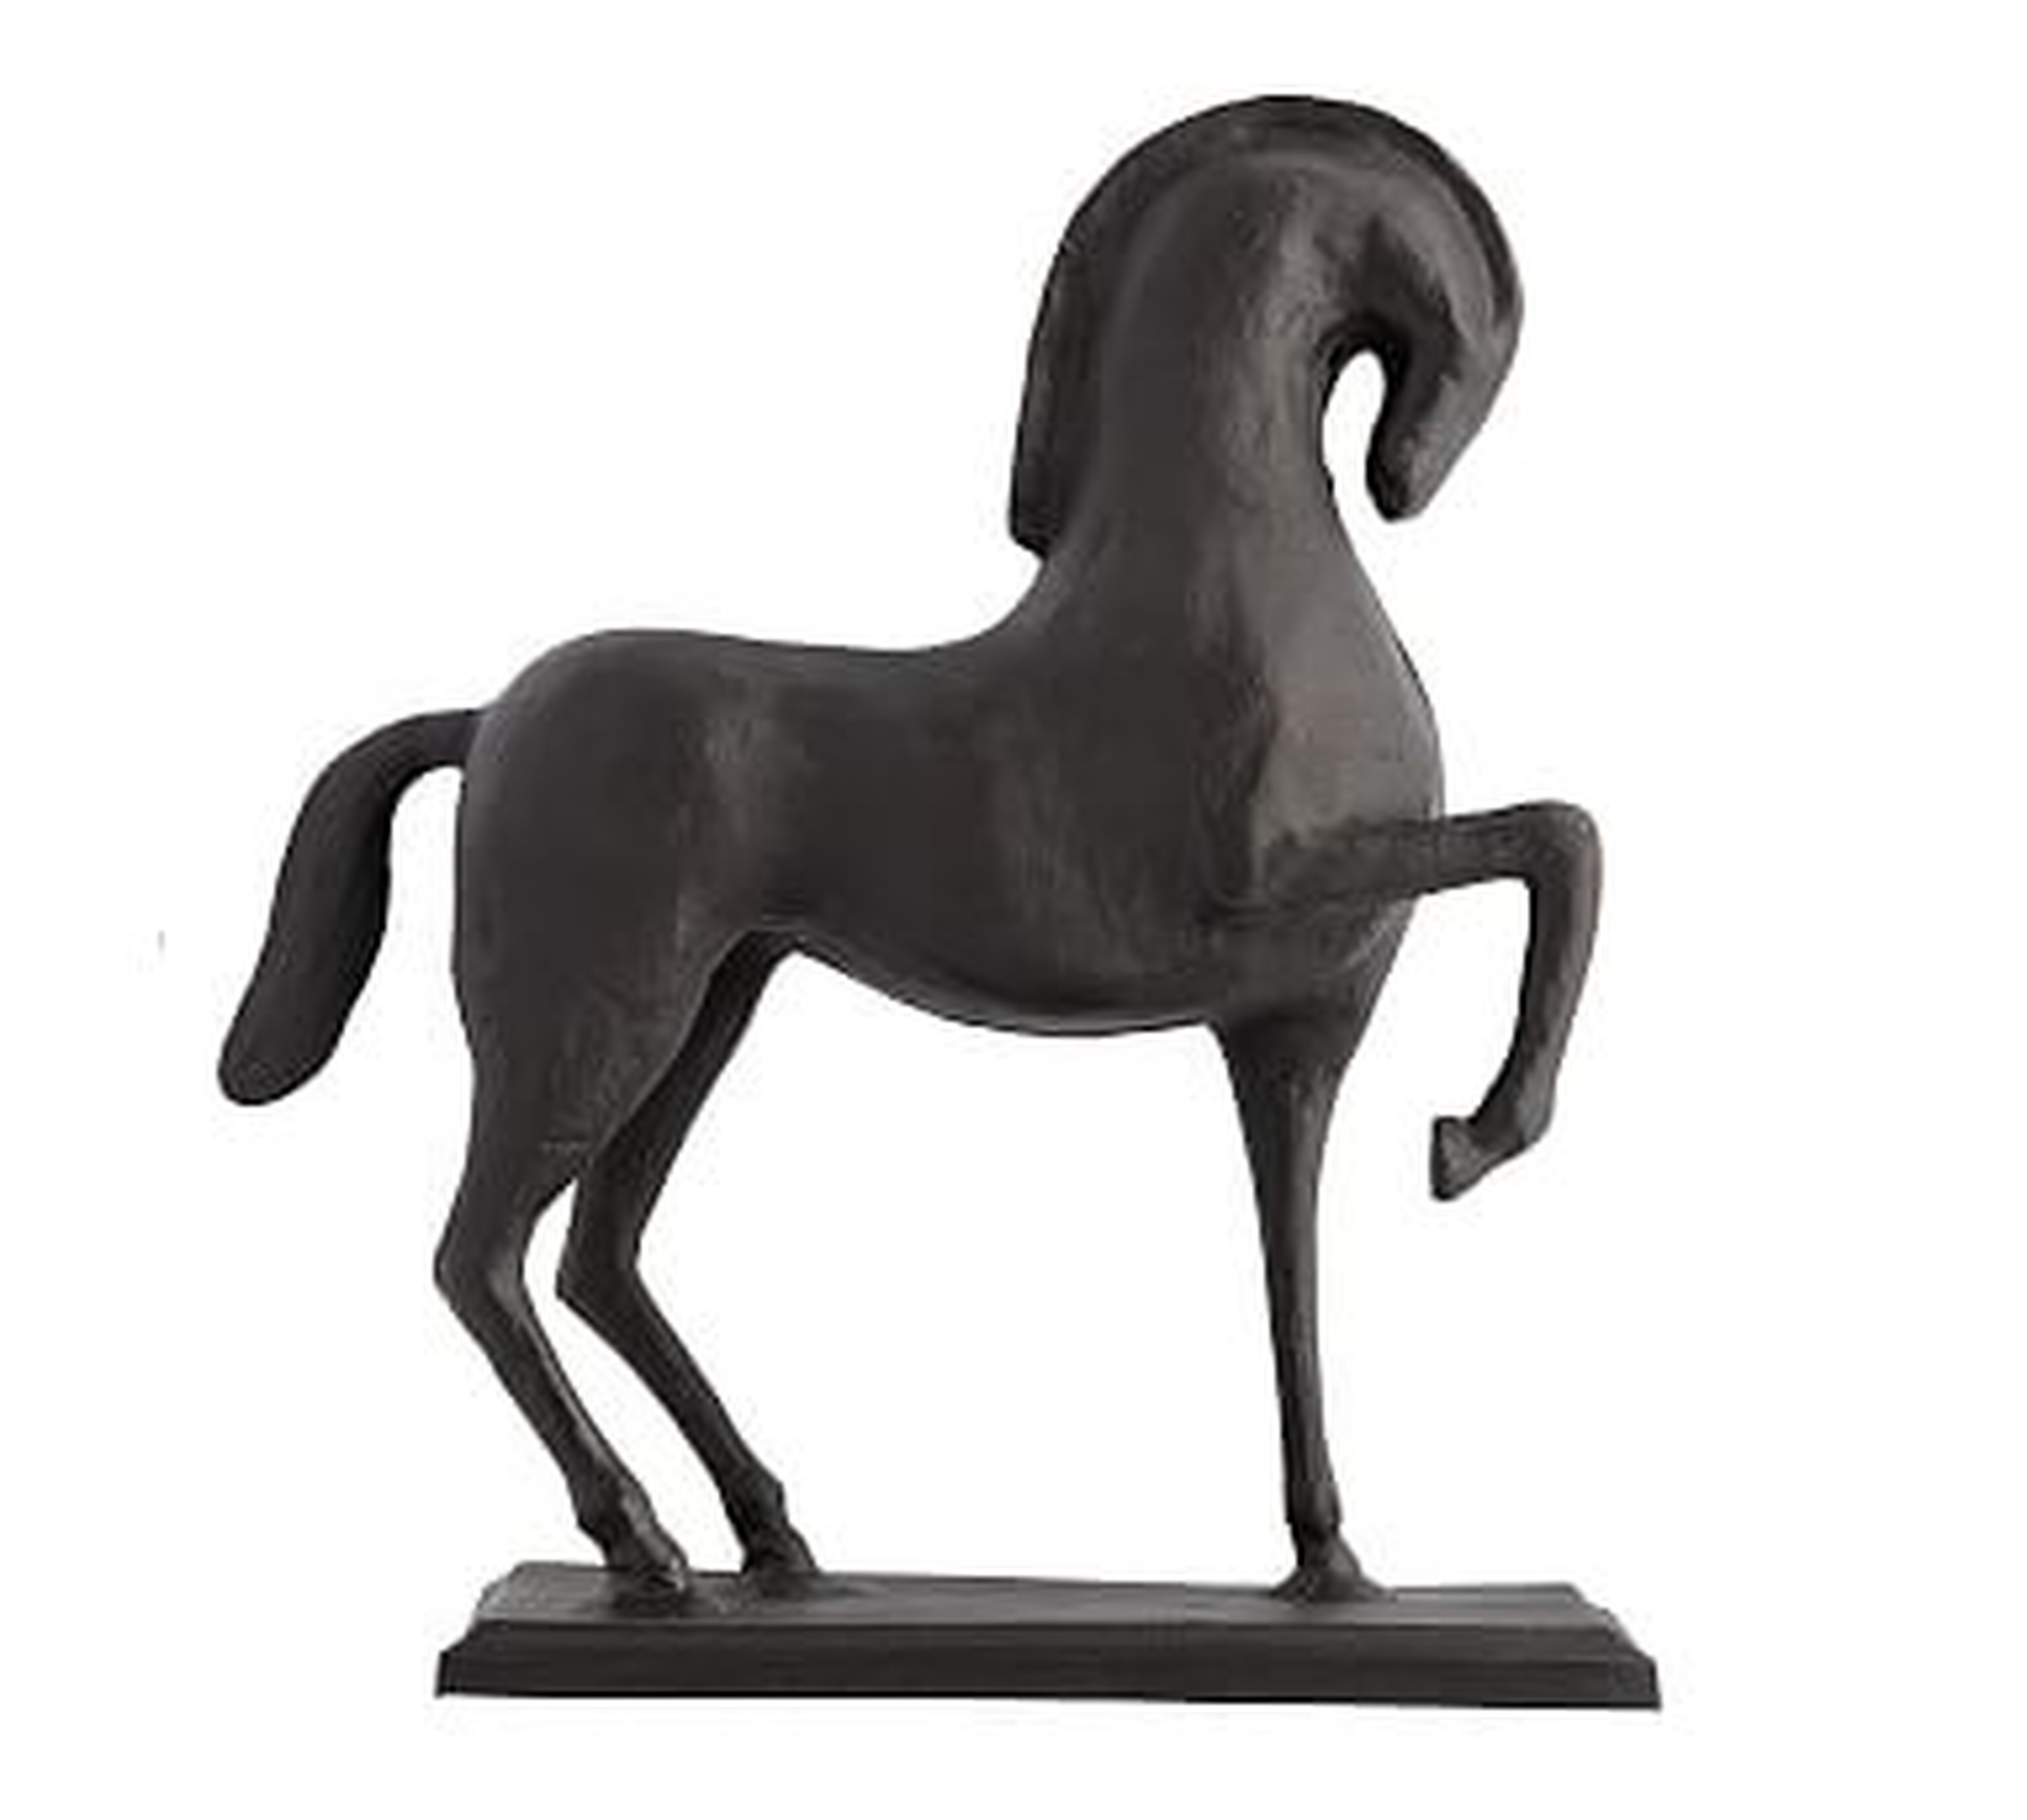 Prancing Horse Object, Bronze - One Size - Pottery Barn